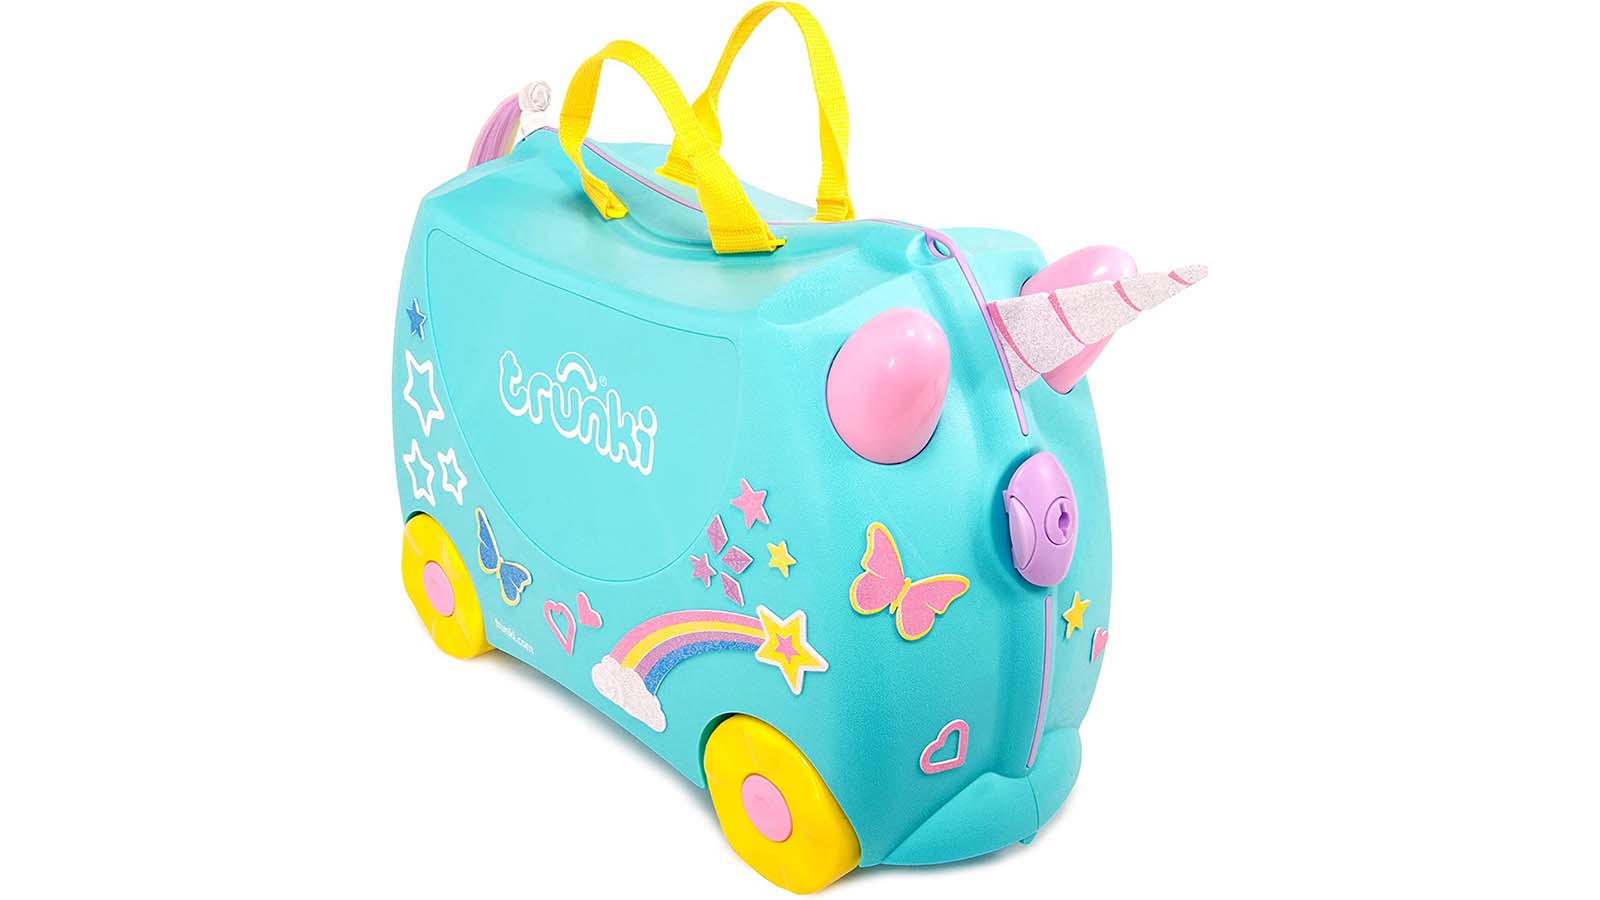 Kids Suitcases: Find Cute Carry On Luggage For Children